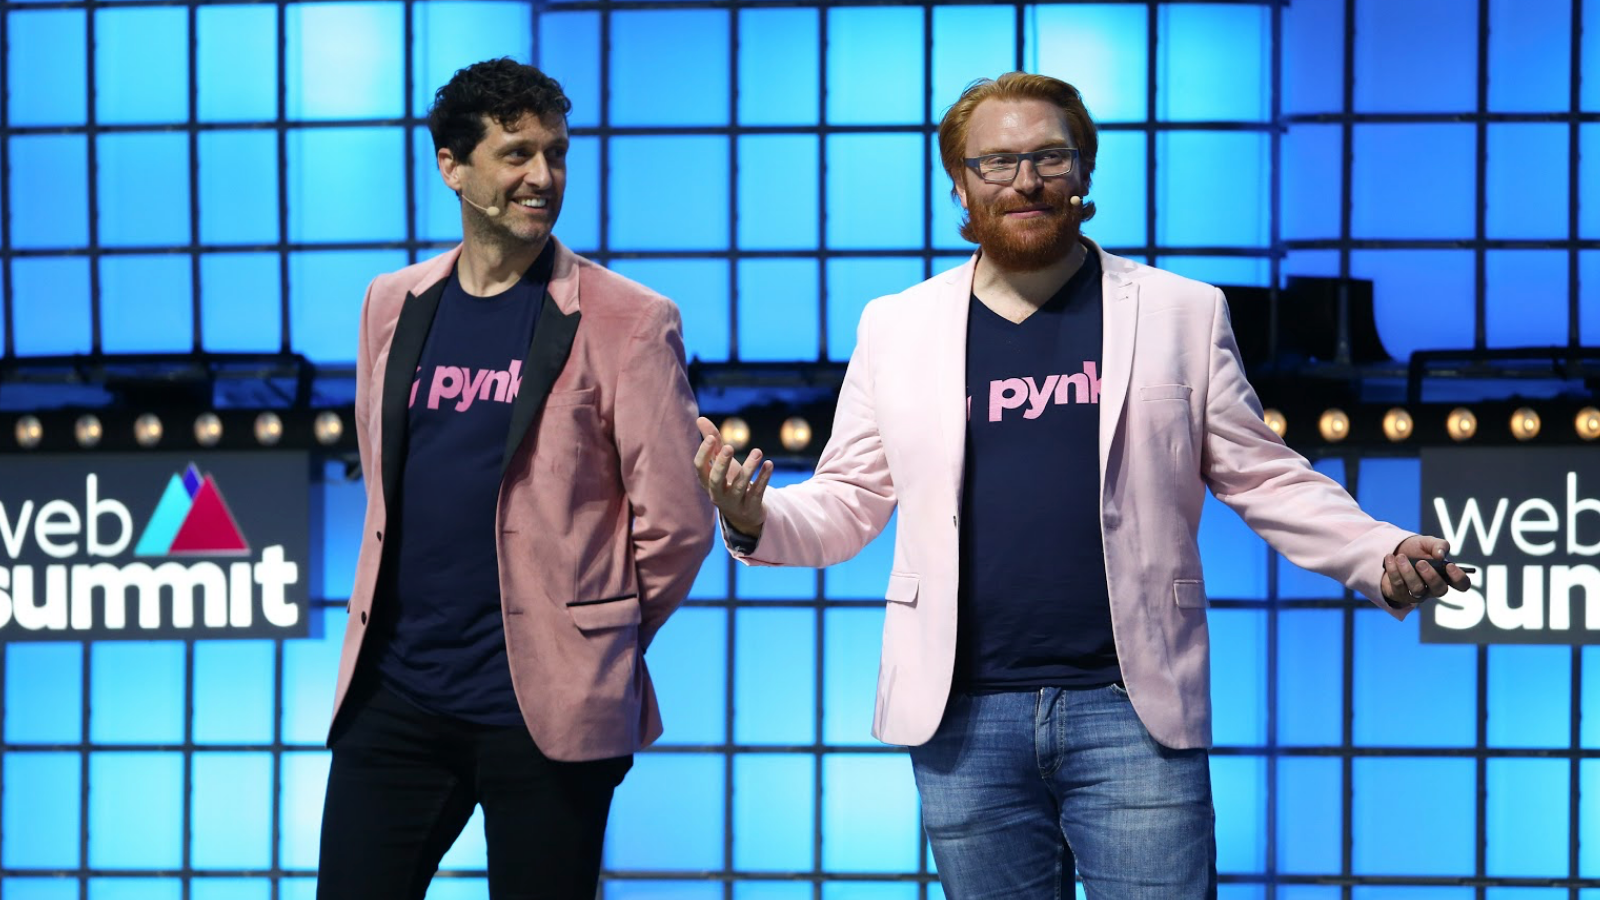 Pynk, Friday, May 21, 2021, Press release picture